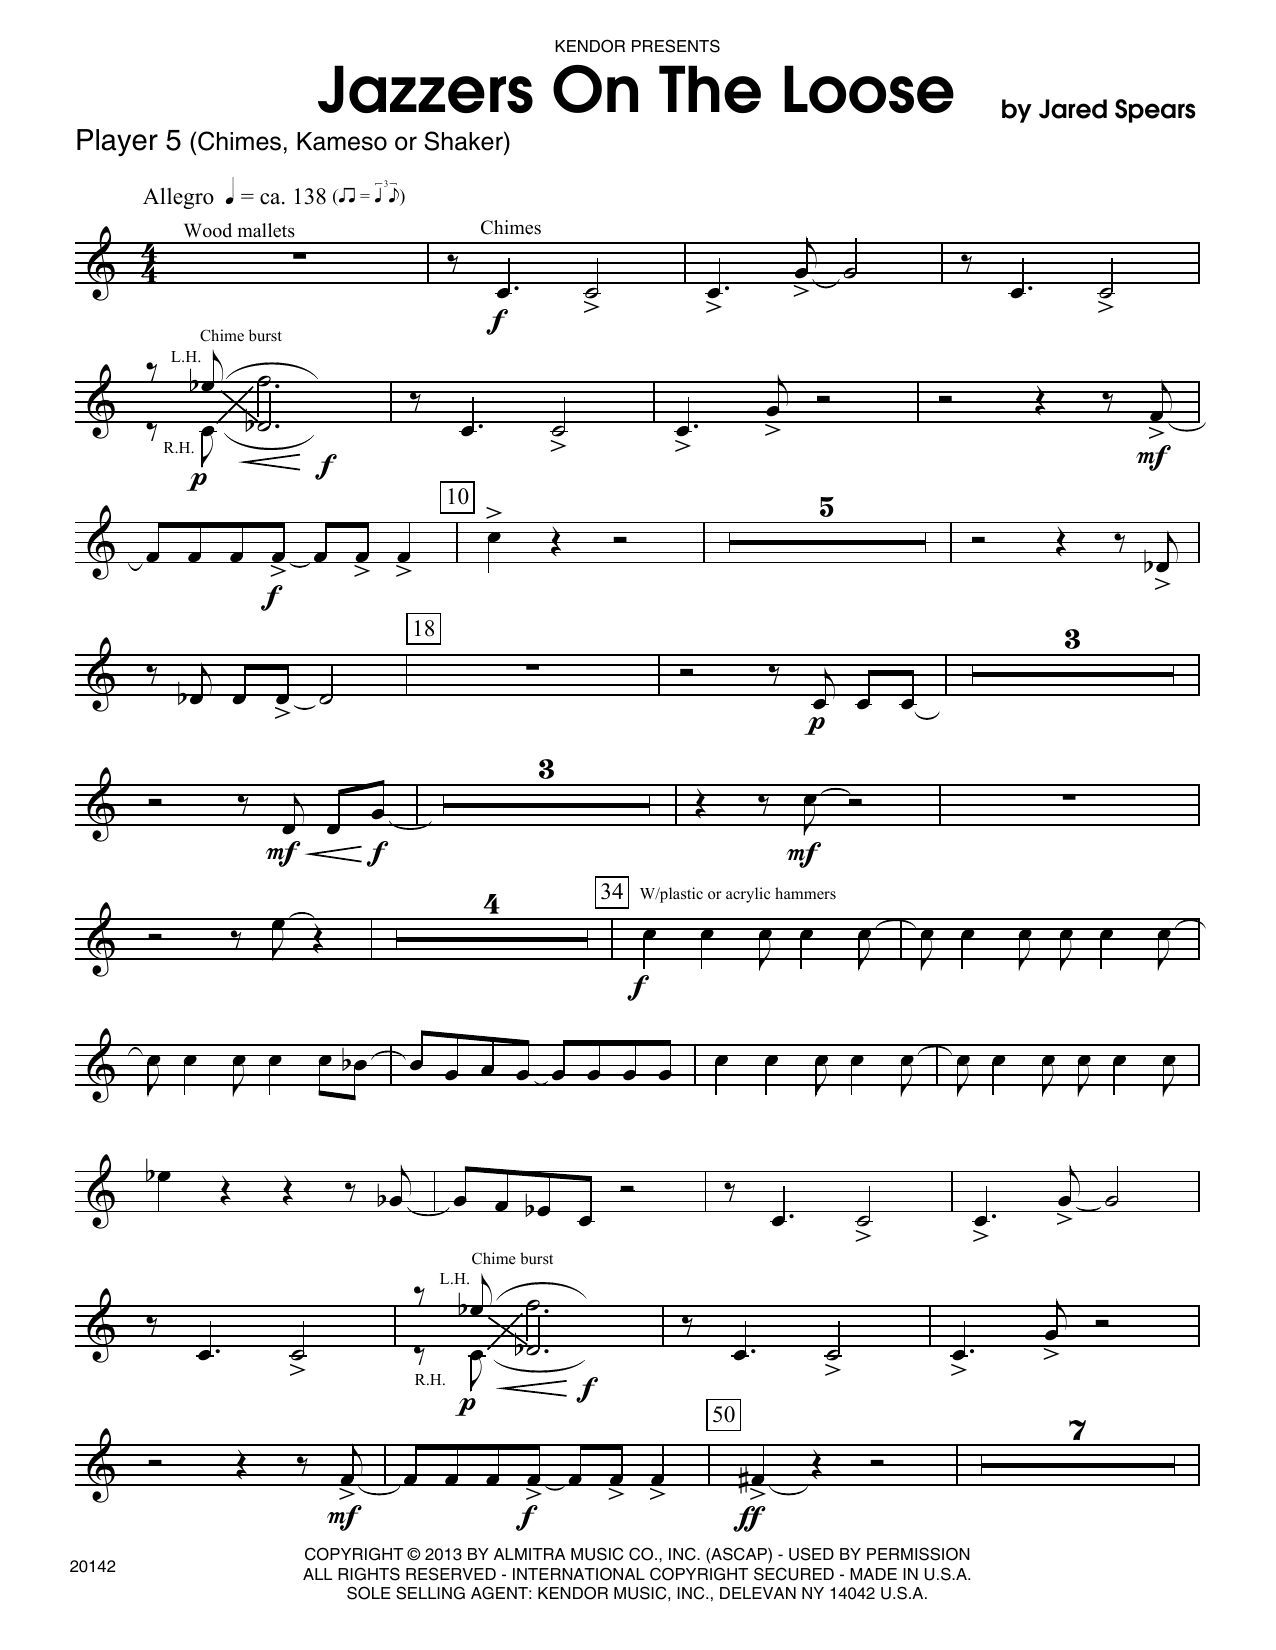 Download Jared Spears Jazzers On The Loose - Chimes Sheet Music